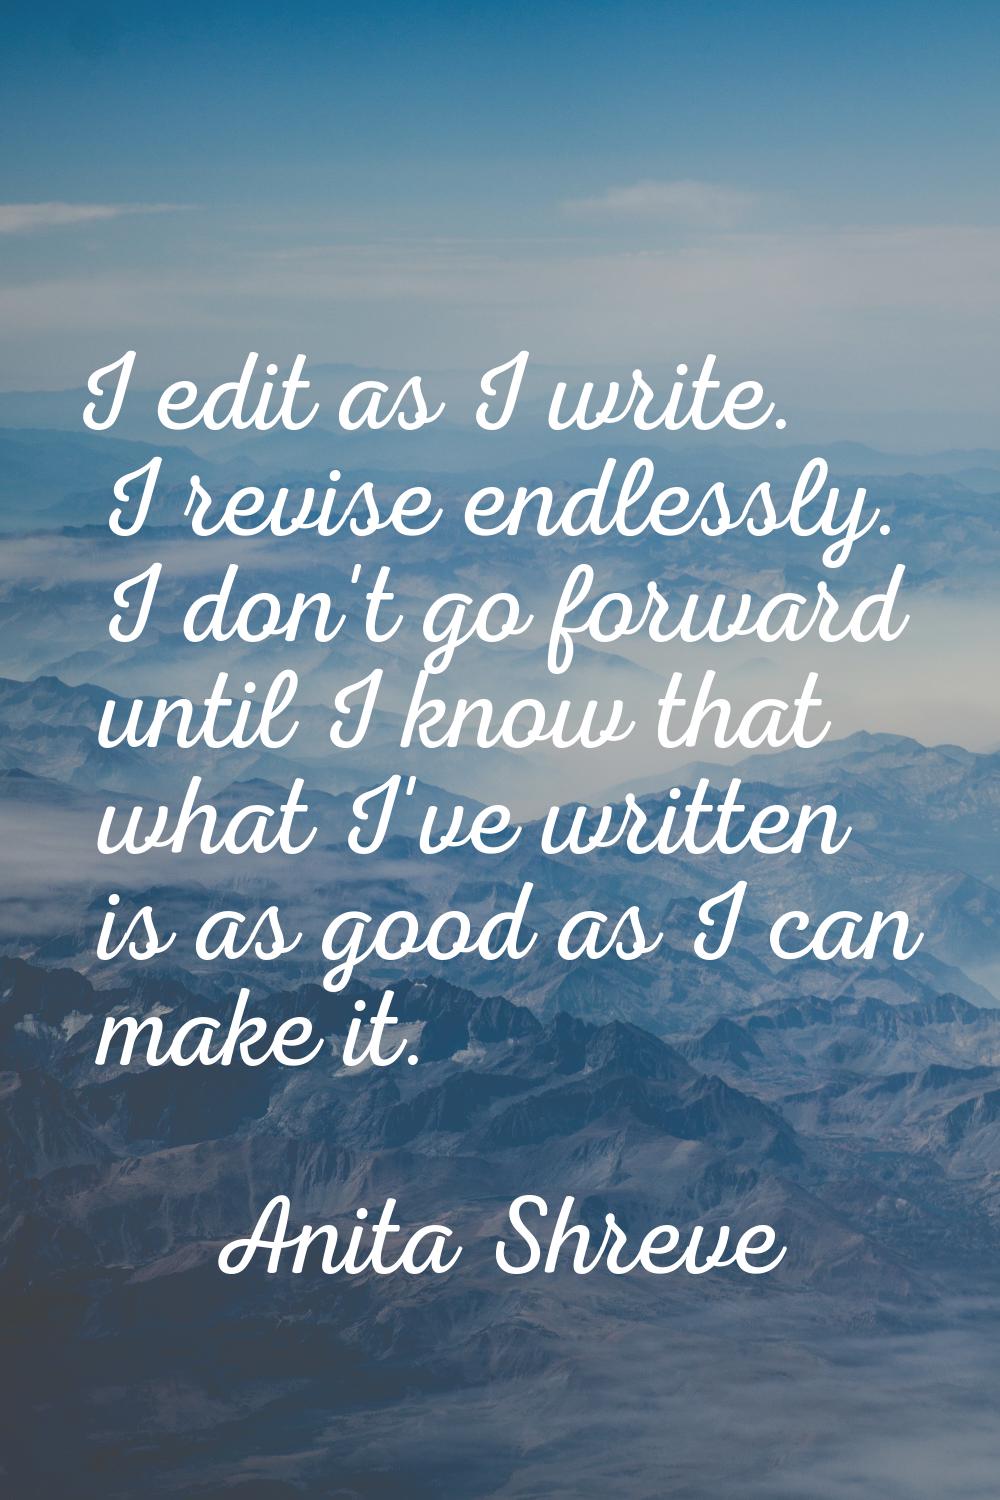 I edit as I write. I revise endlessly. I don't go forward until I know that what I've written is as